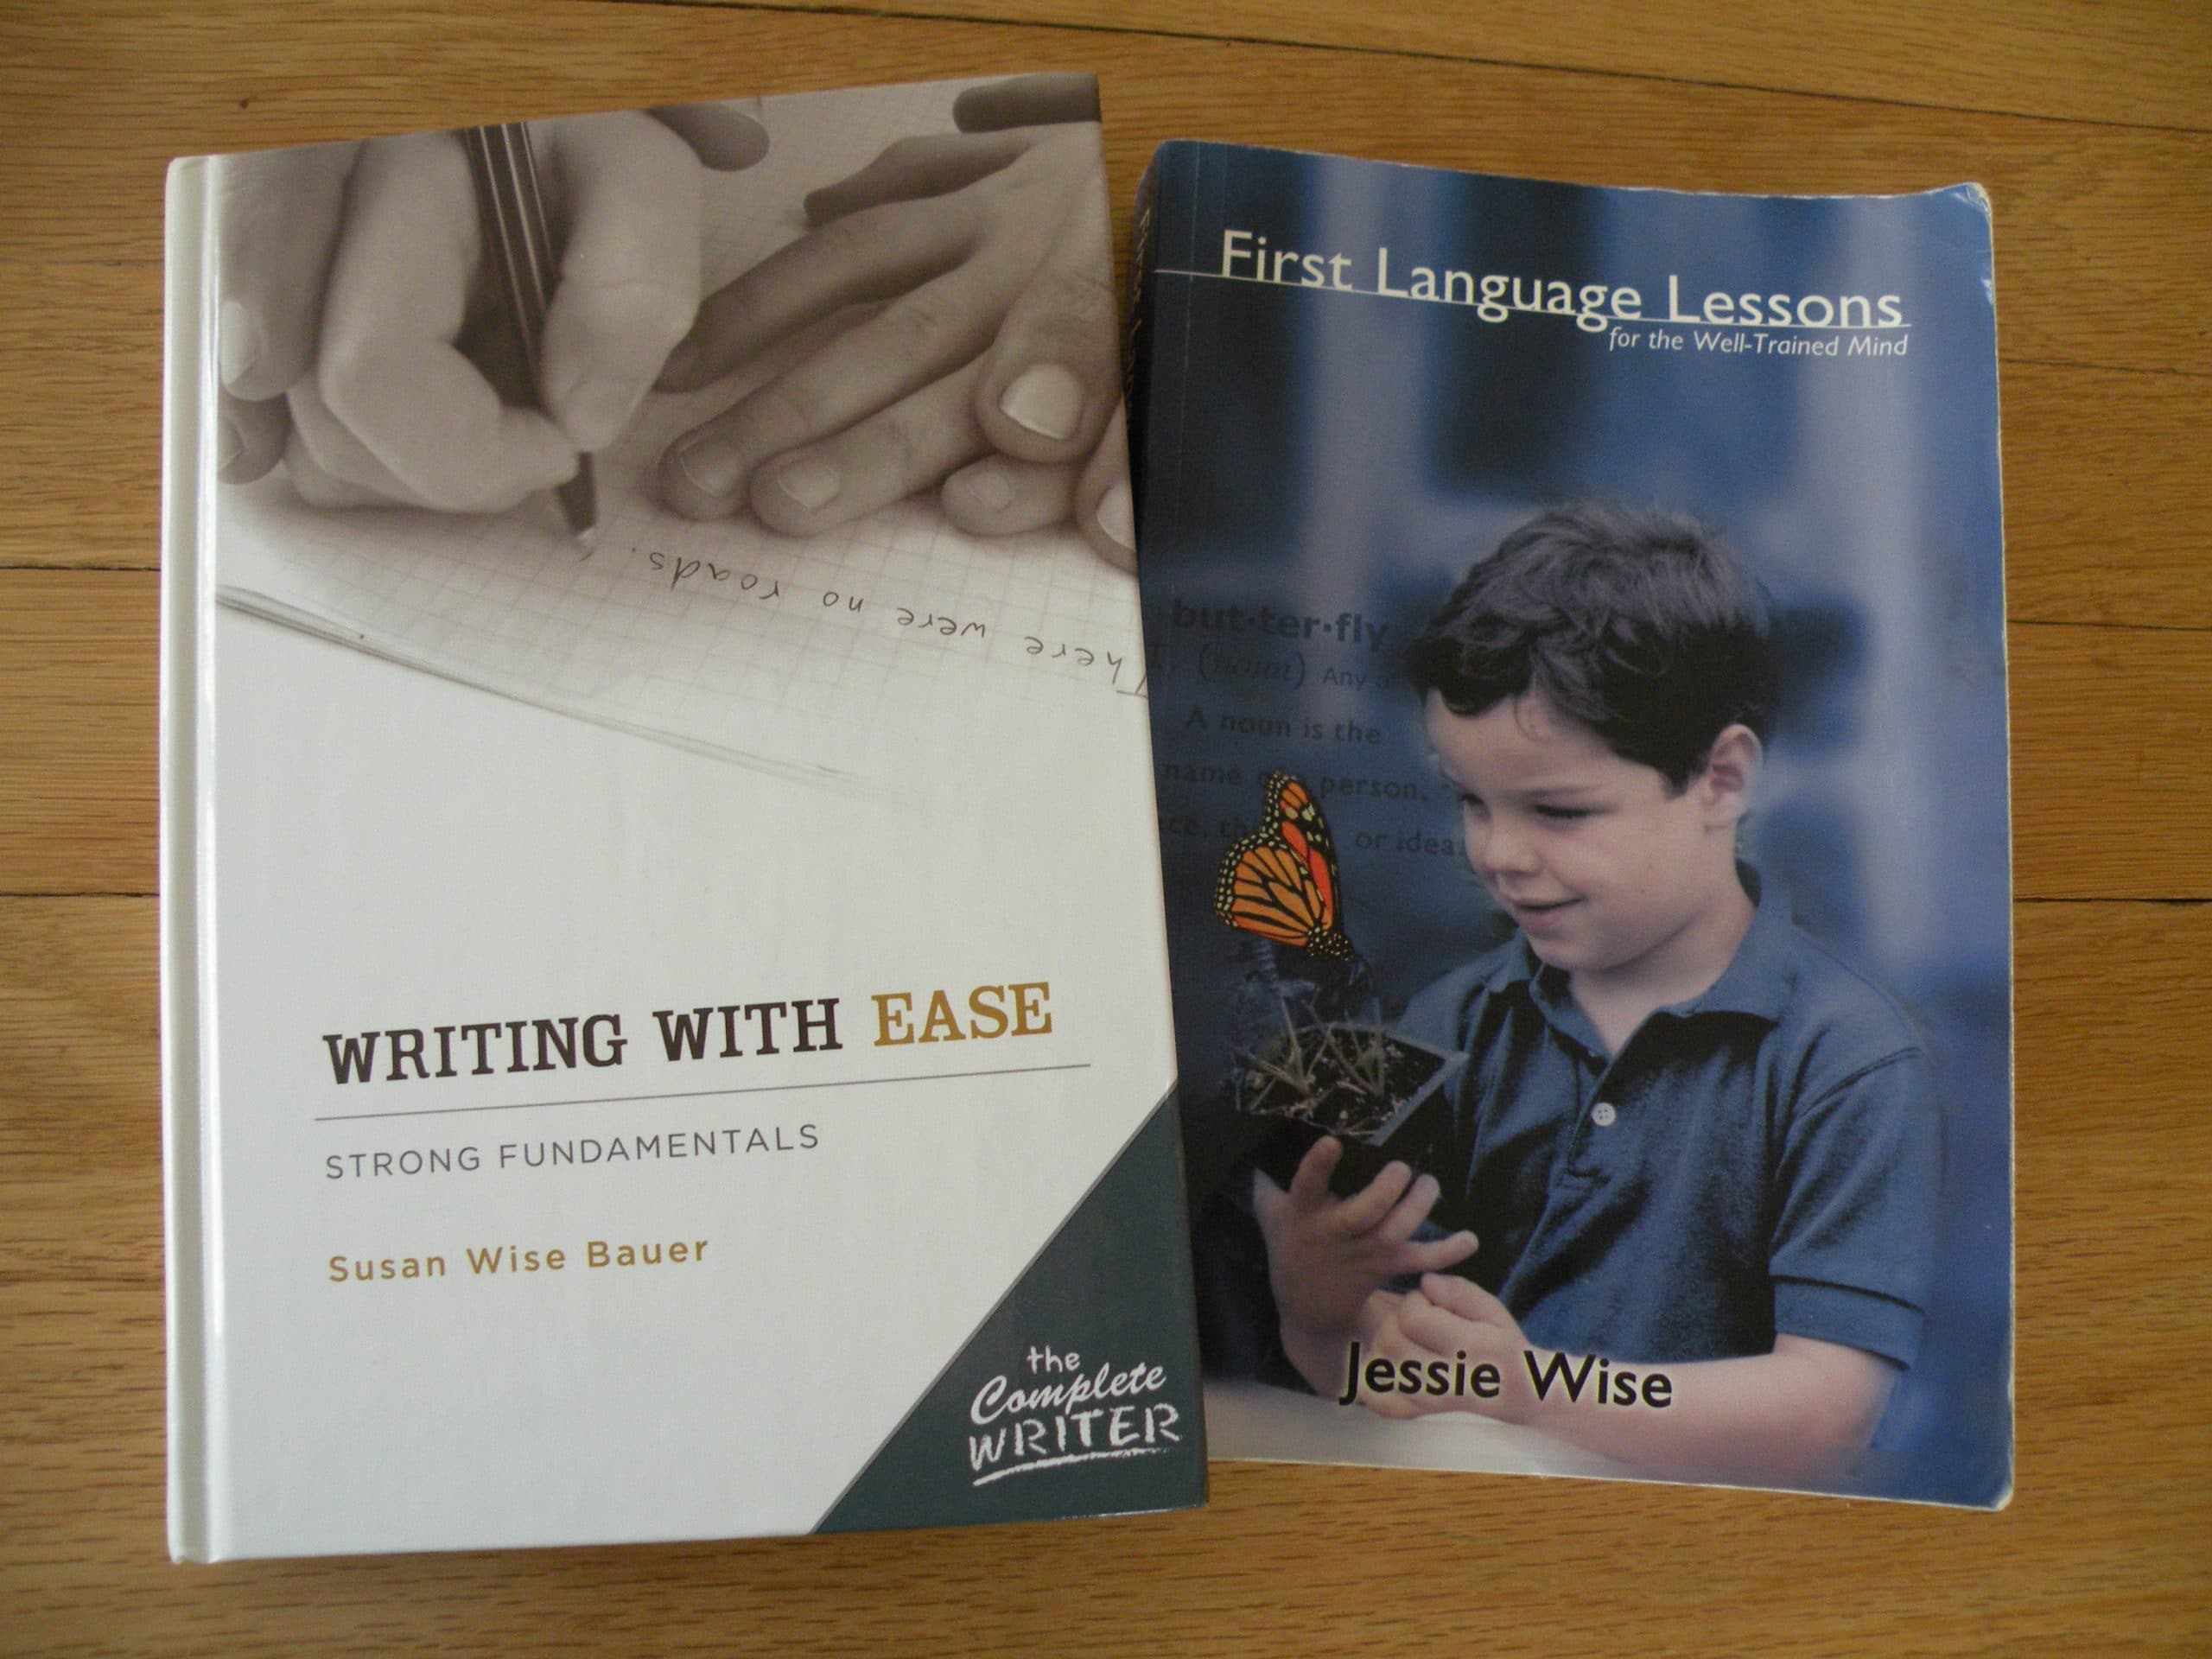 A Little Classical Teamwork:  First Language Lessons and Writing with Ease